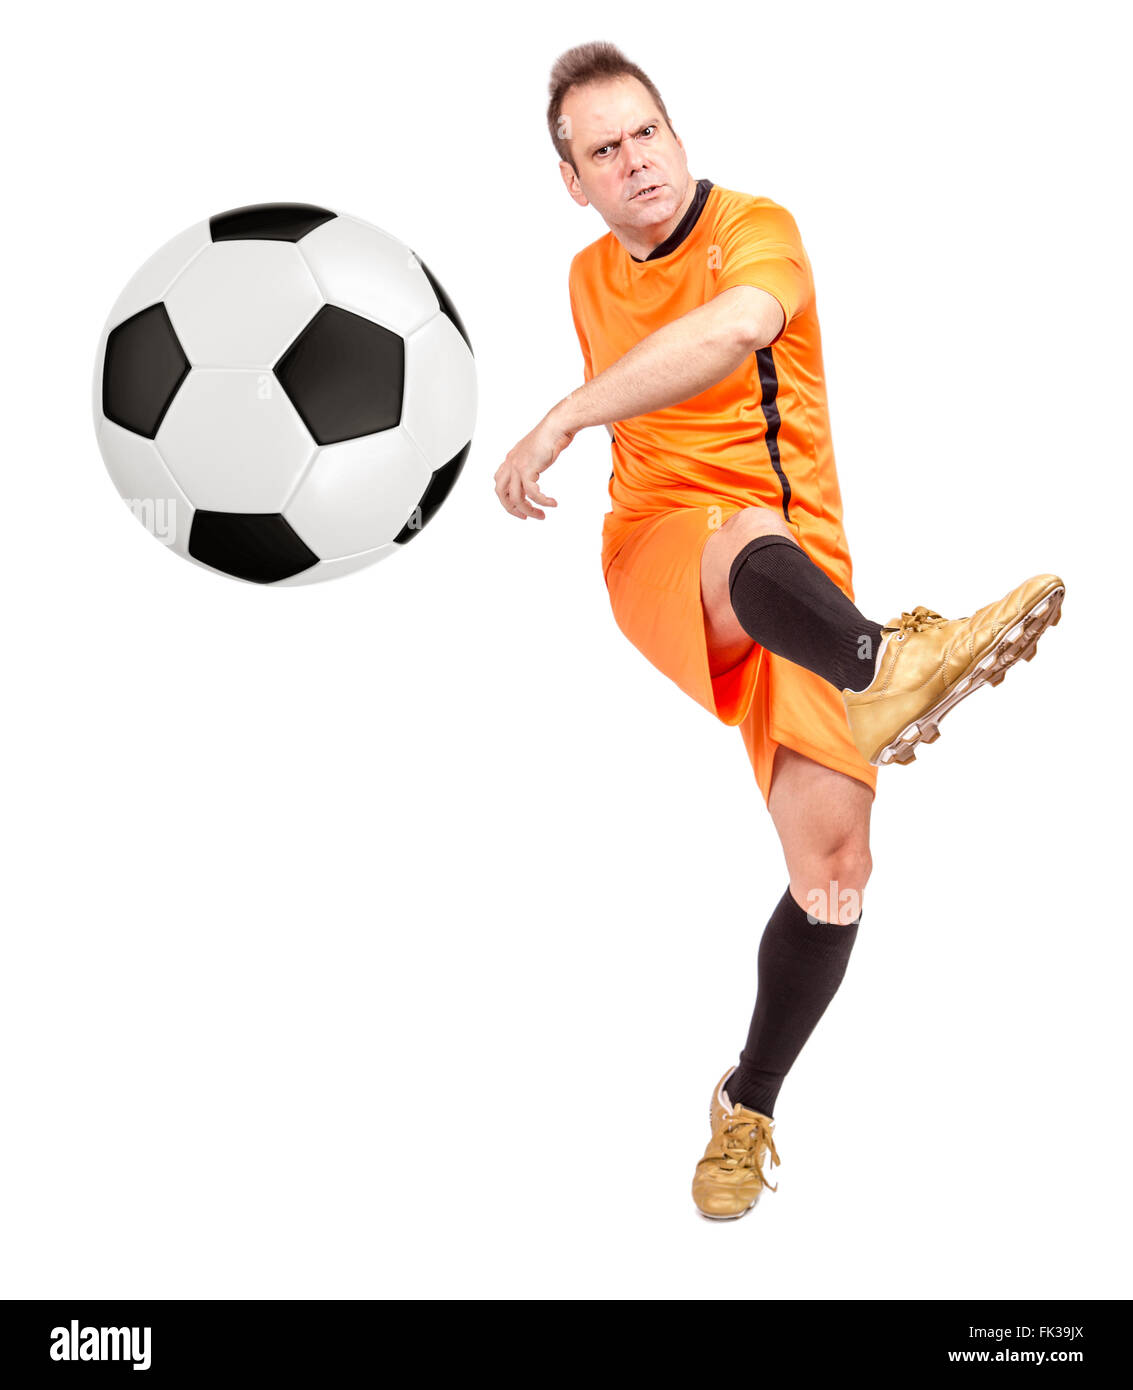 Faceless person standing with soccer ball between legs on grass · Free  Stock Photo